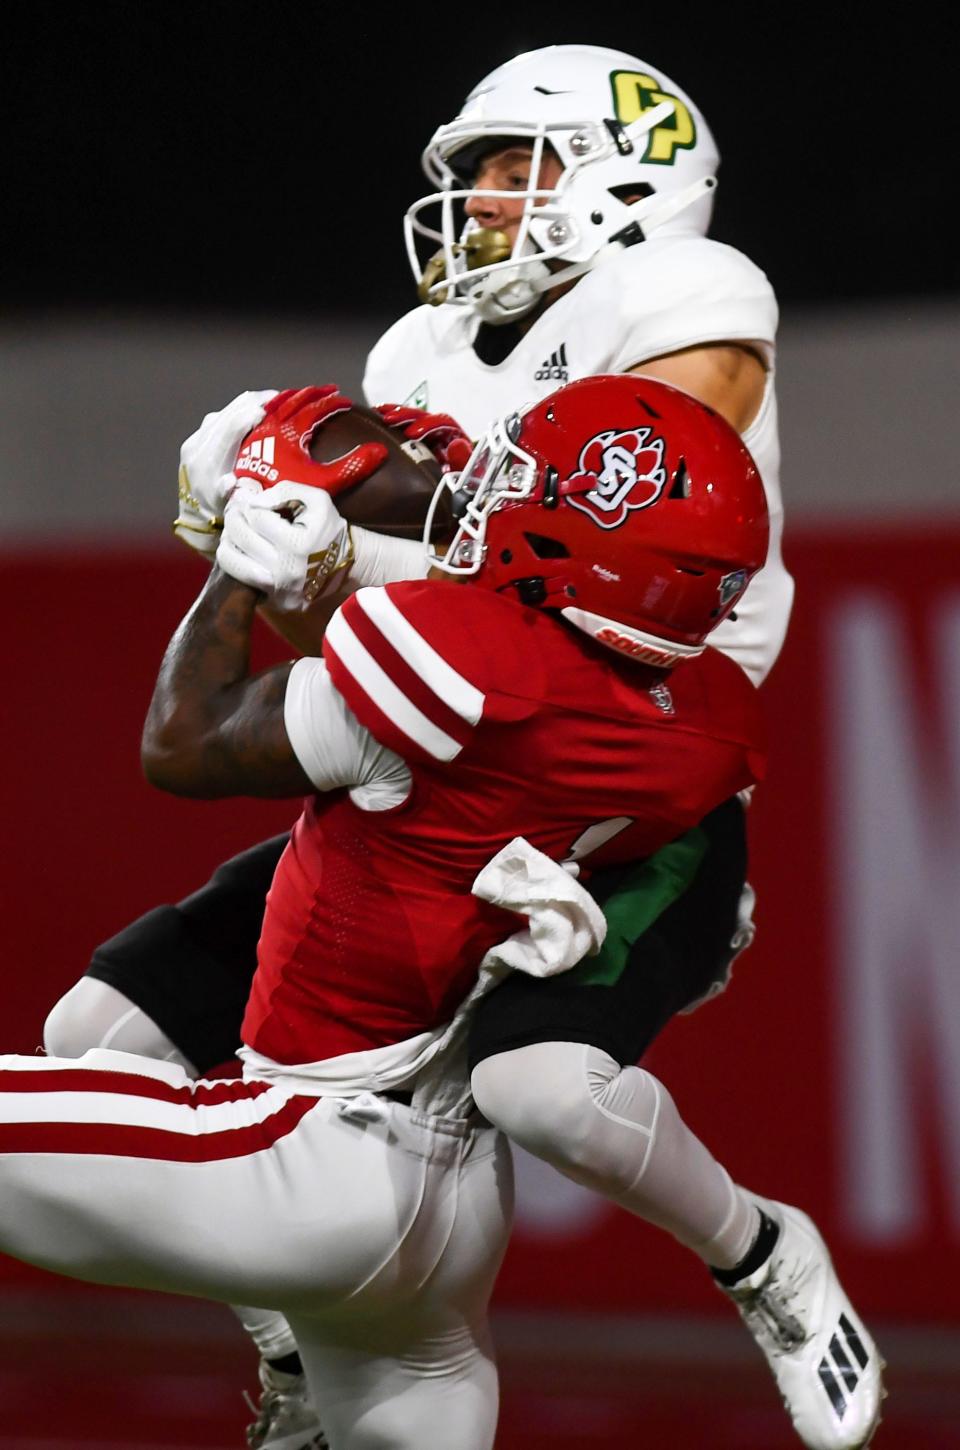 Cal Poly’s Logan Booher and South Dakota’s Myles Harden both grab the football from the air in the end zone Sept. 17, 2022, in Vermillion, South Dakota.